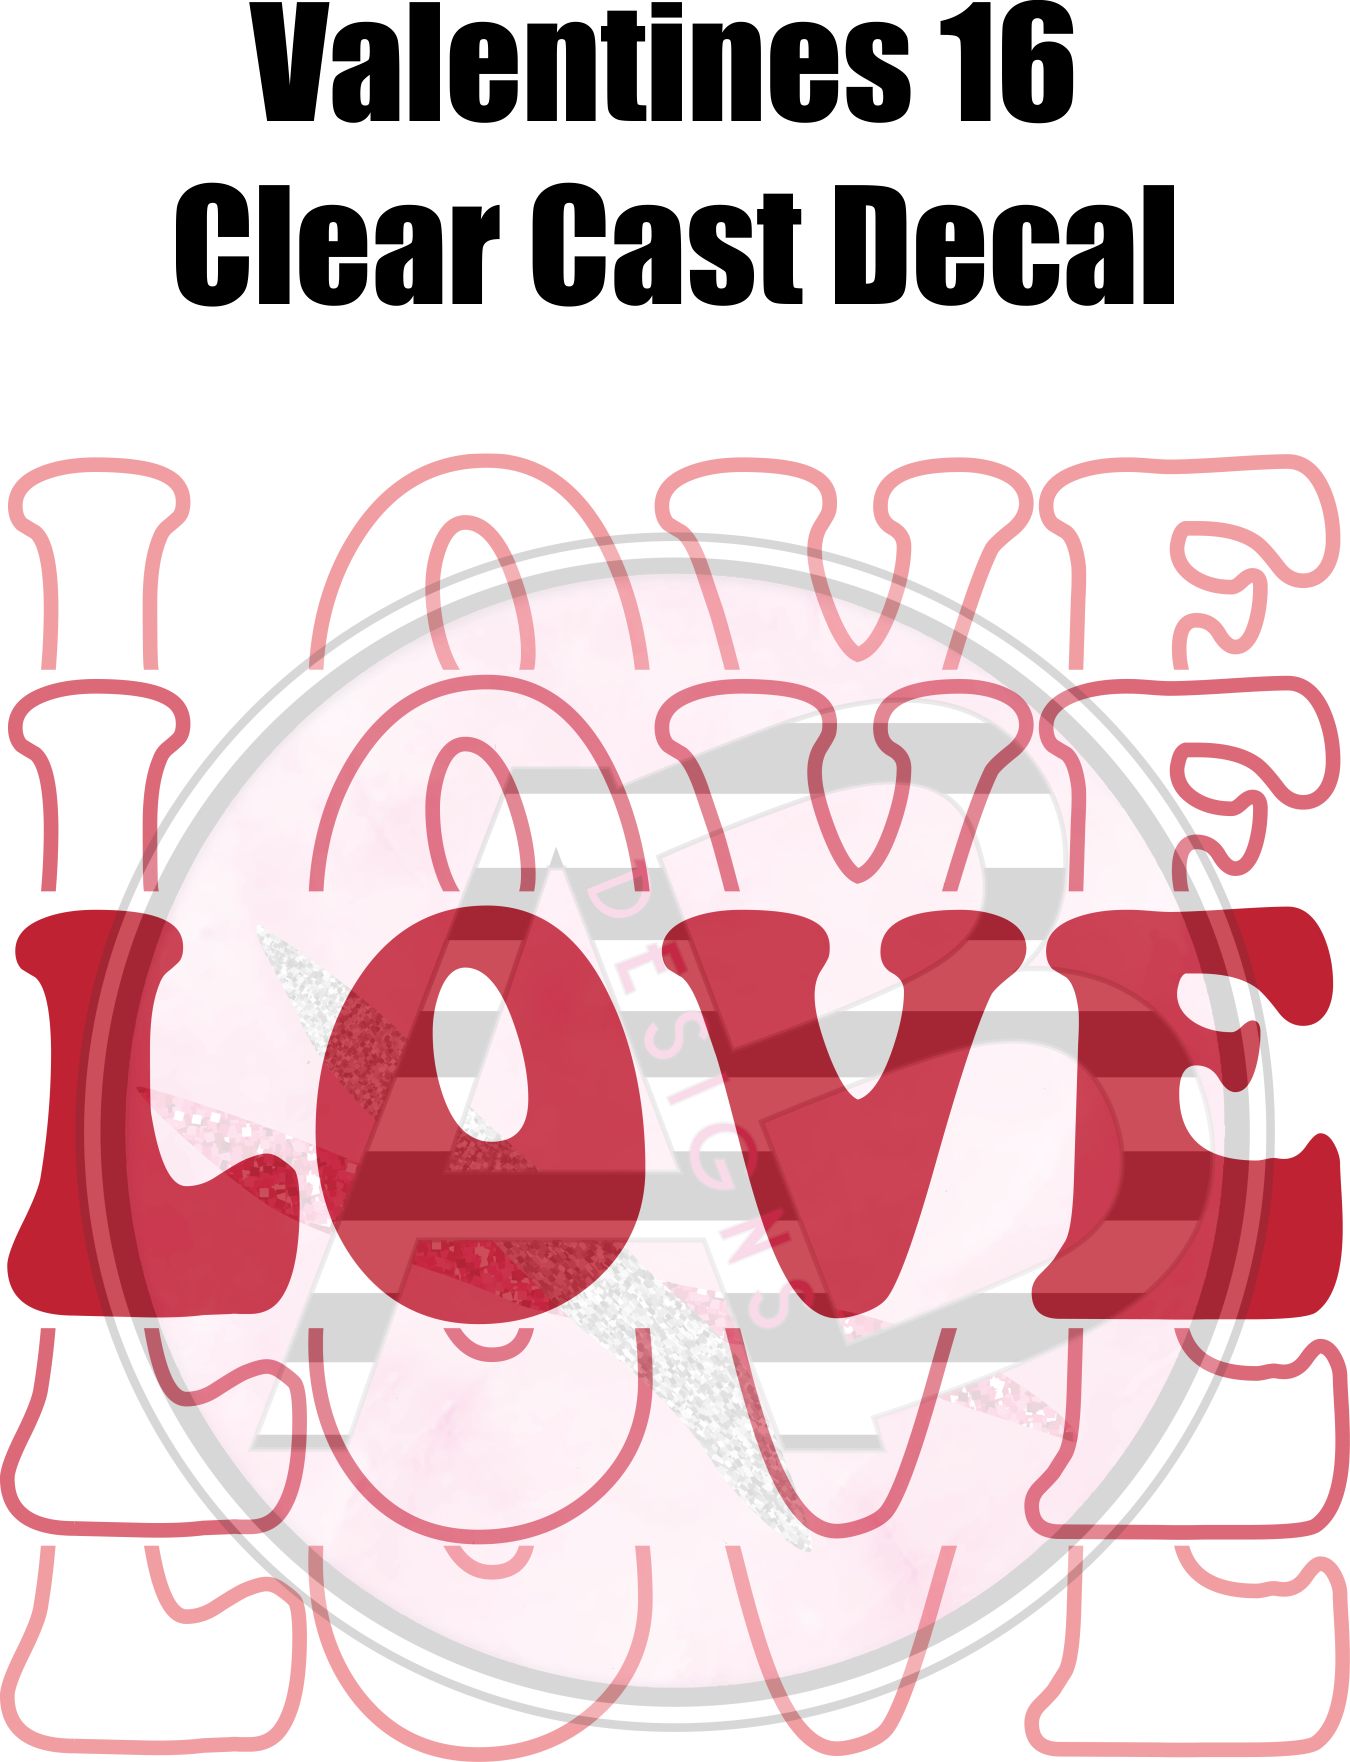 Valentines 16 - Clear Cast Decal